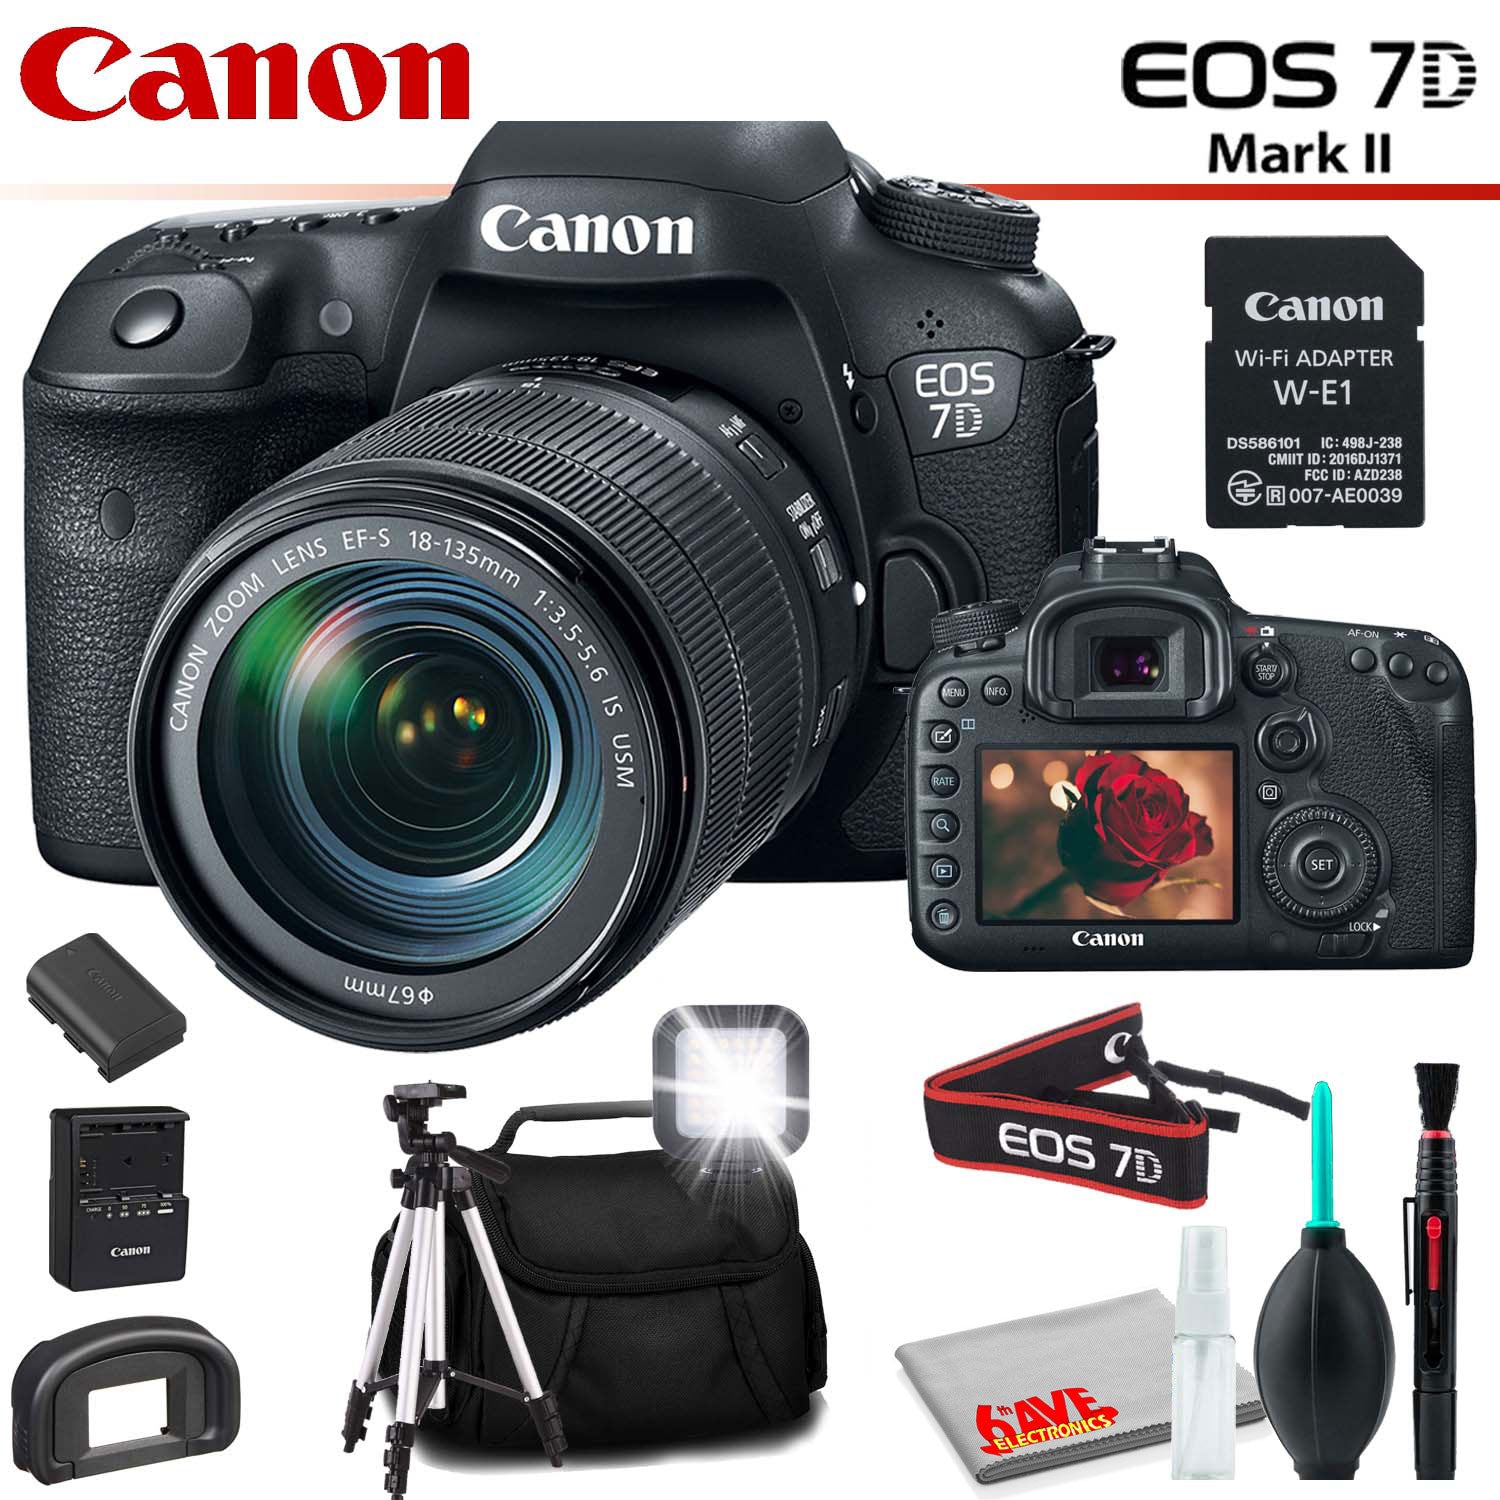 Canon EOS 7D Mark II DSLR Camera with 18-135mm Lens & W-E1 Wi-Fi Adapter With Backpack, Tripod and LED Light and Cleaning Kit